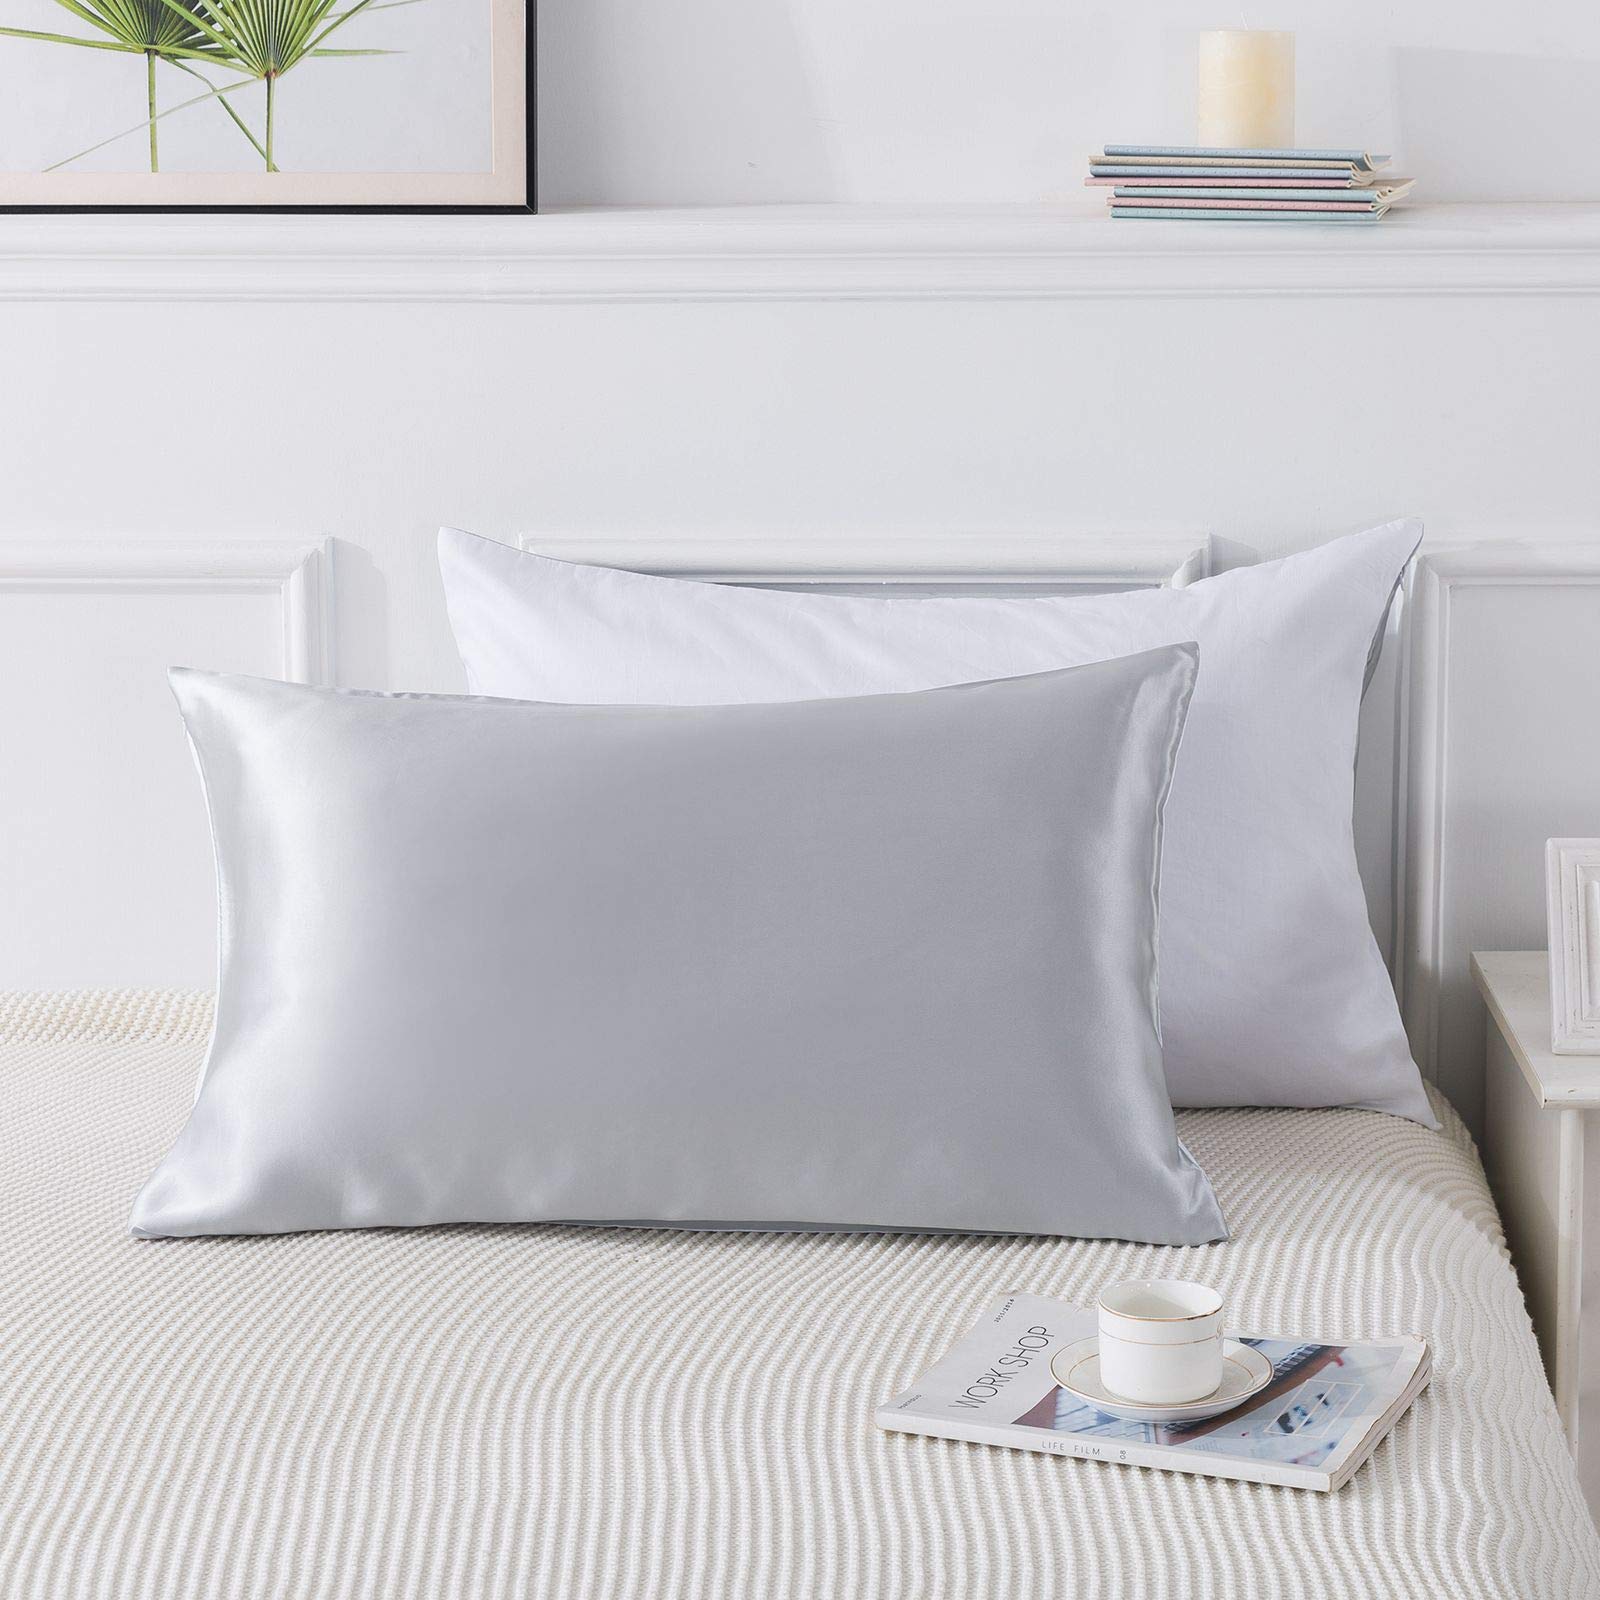 Ethlomoer 100% Mulberry Silk Pillowcase for Hair and Skin with Cotton Underside, Hypoallergenic 19 Momme for Curly Hair with Hidden Zipper, 1 pc, Light Grey 50 x 75 cm